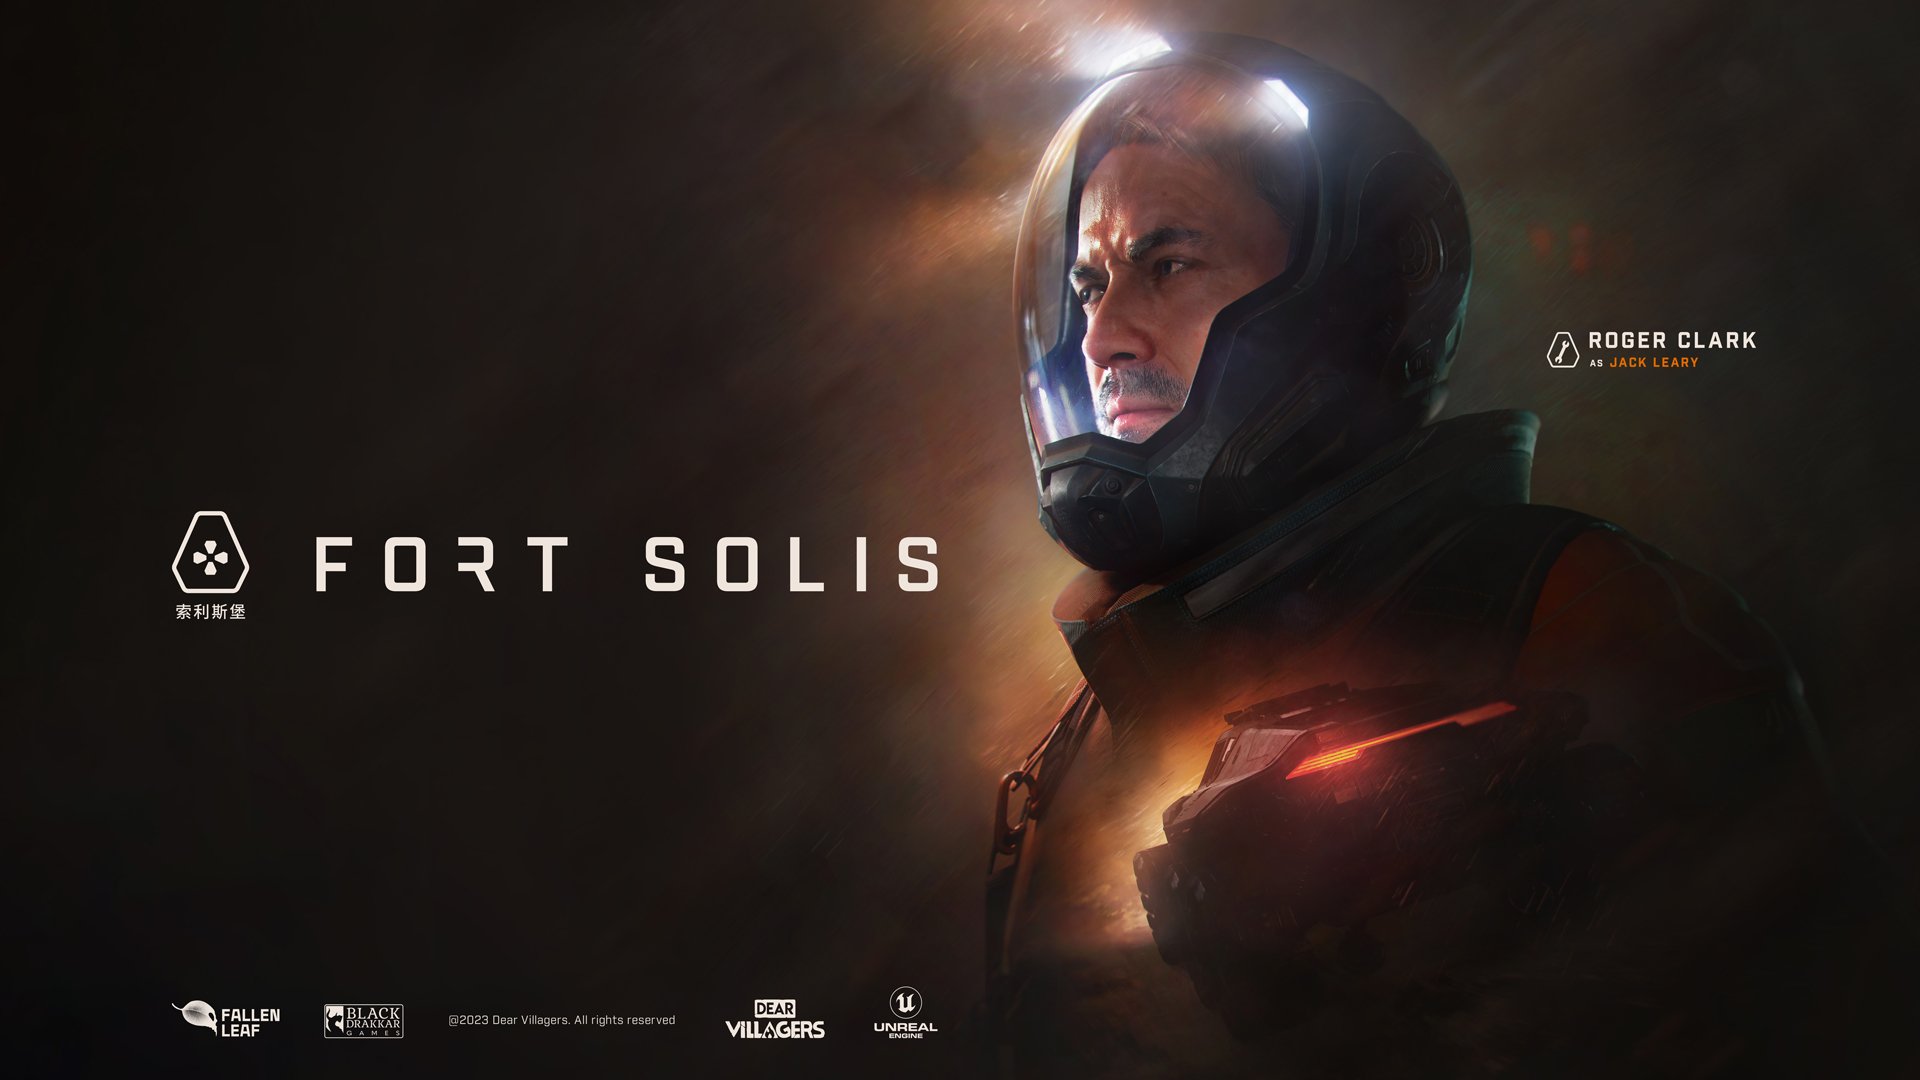 New Narrative Sci-Fi Game Fort Solis Launches on PS5 and PC